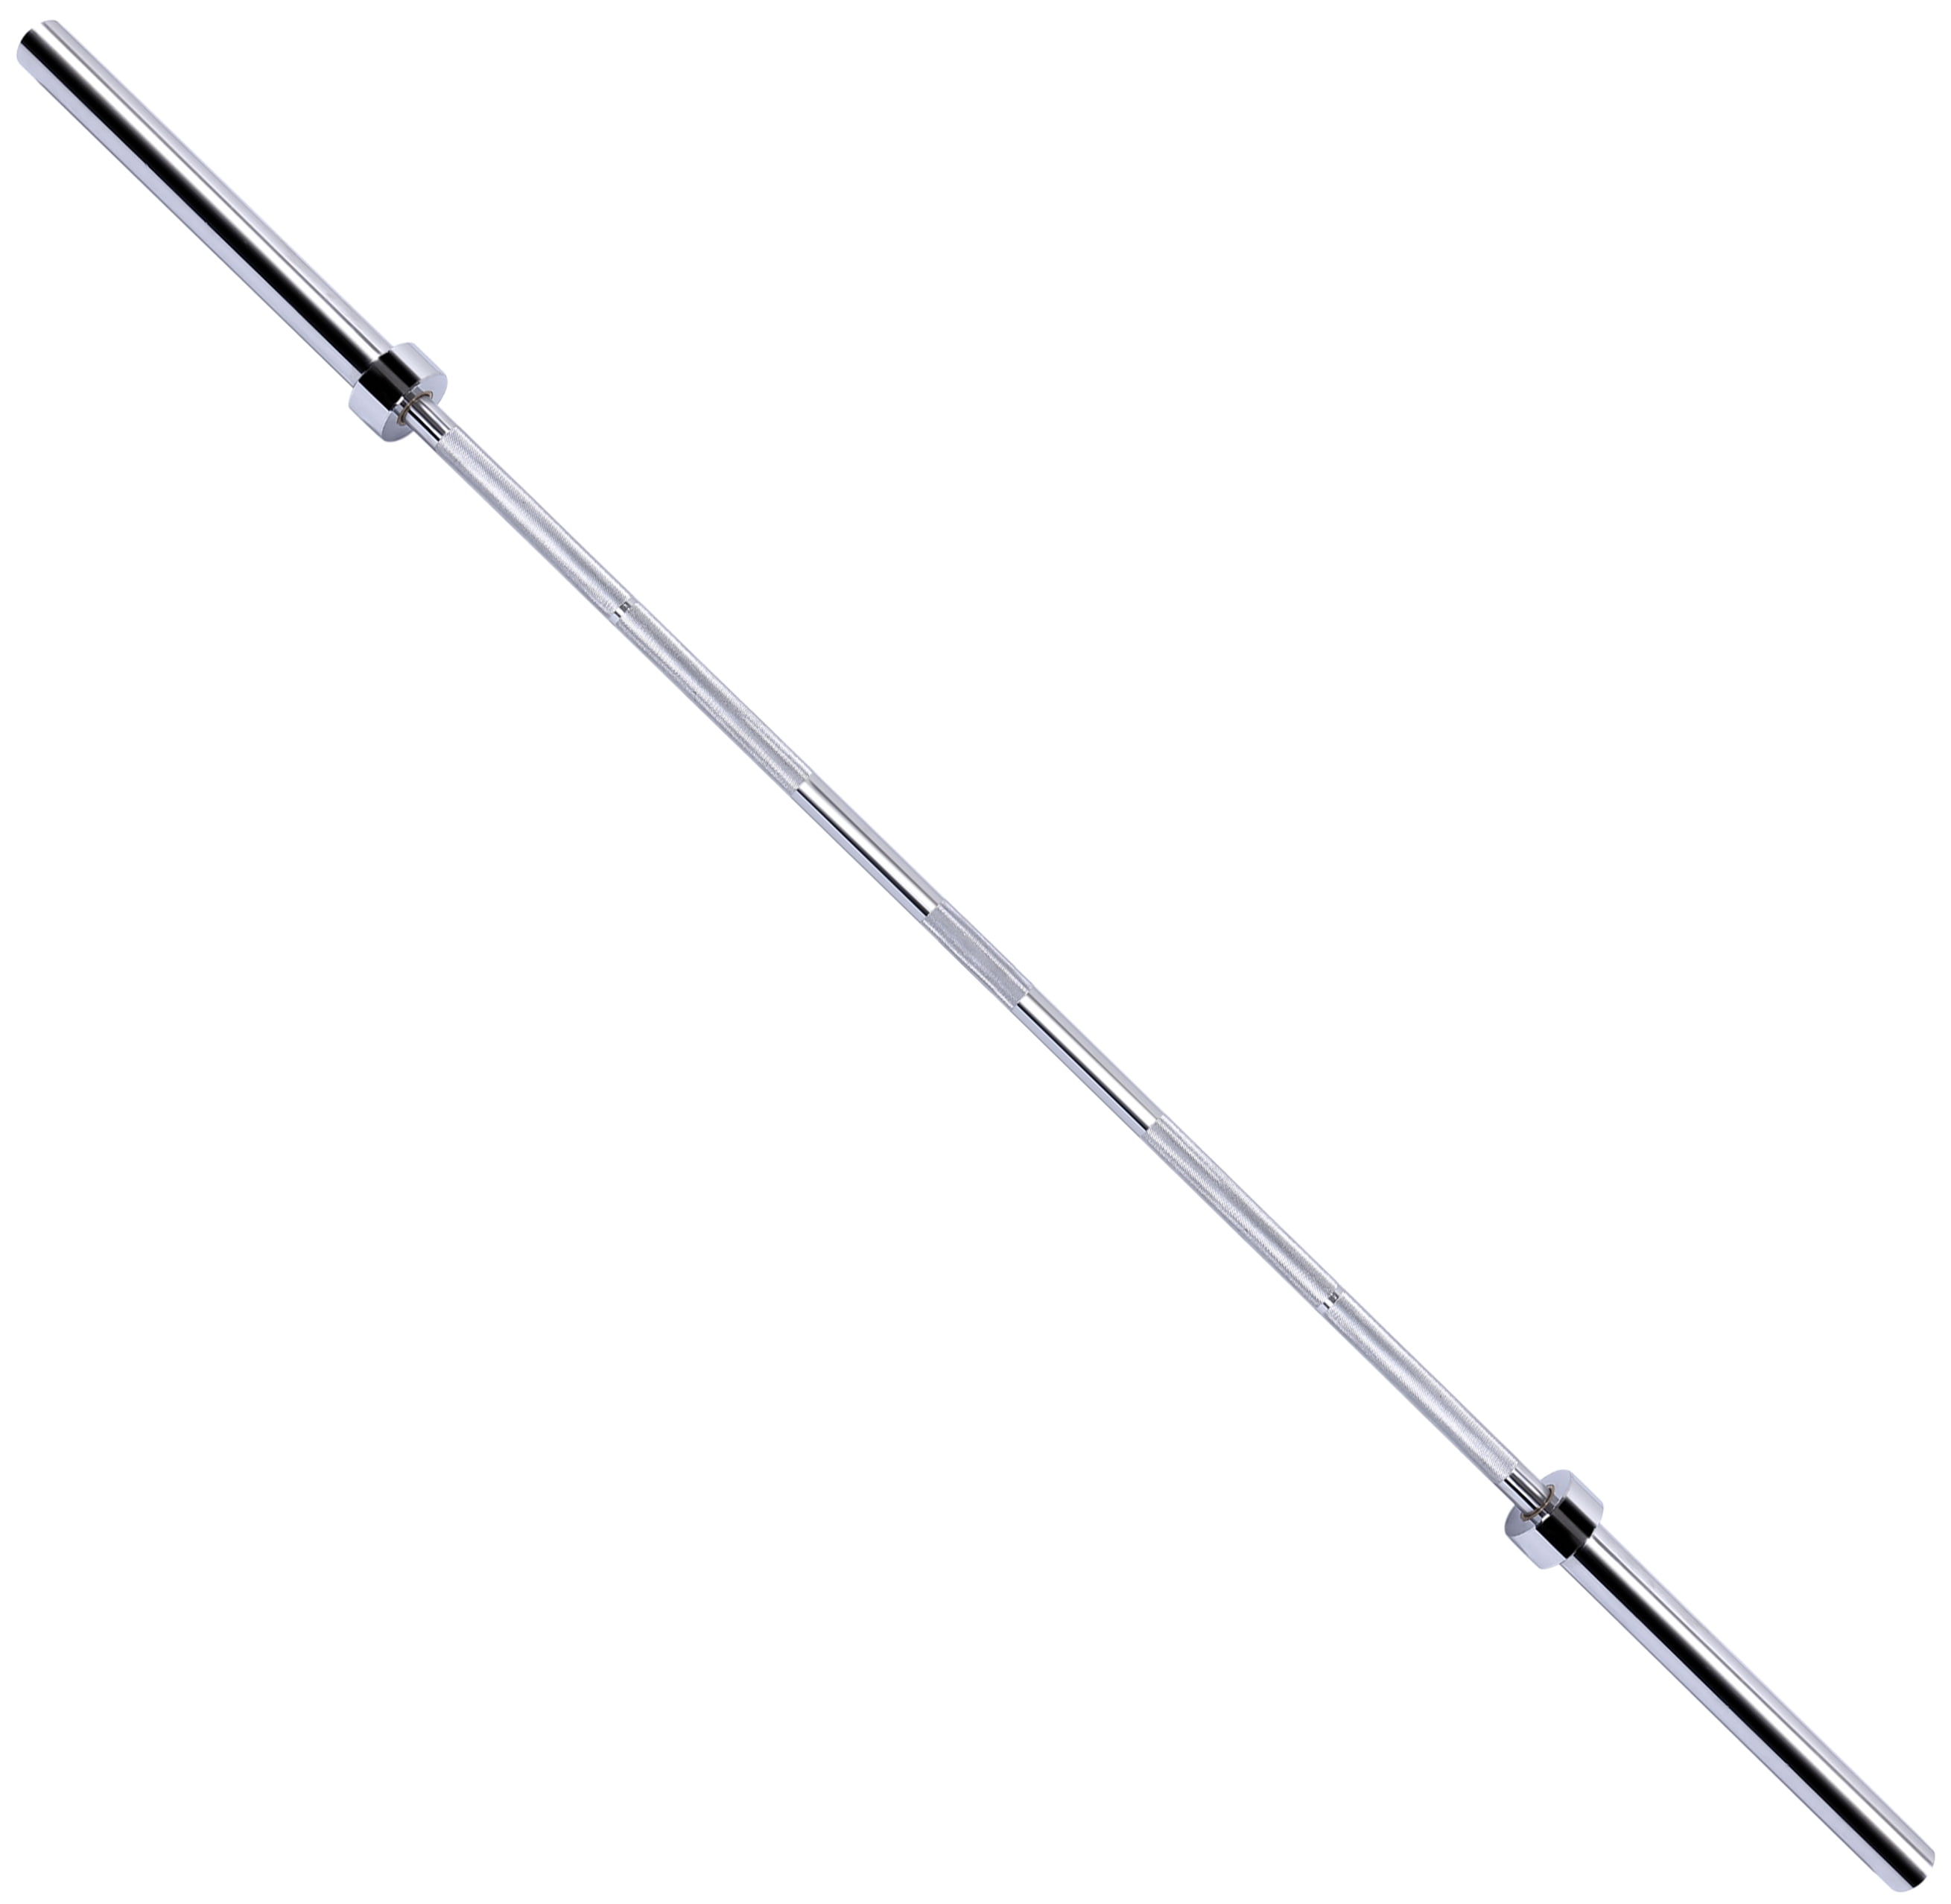 Gifts for Christmas Barbell 5-Foot Barbell 176LB Capacity, 2 Inch  Weightlifting Barbell, Weights Lifting Power Lifting (Silver) 